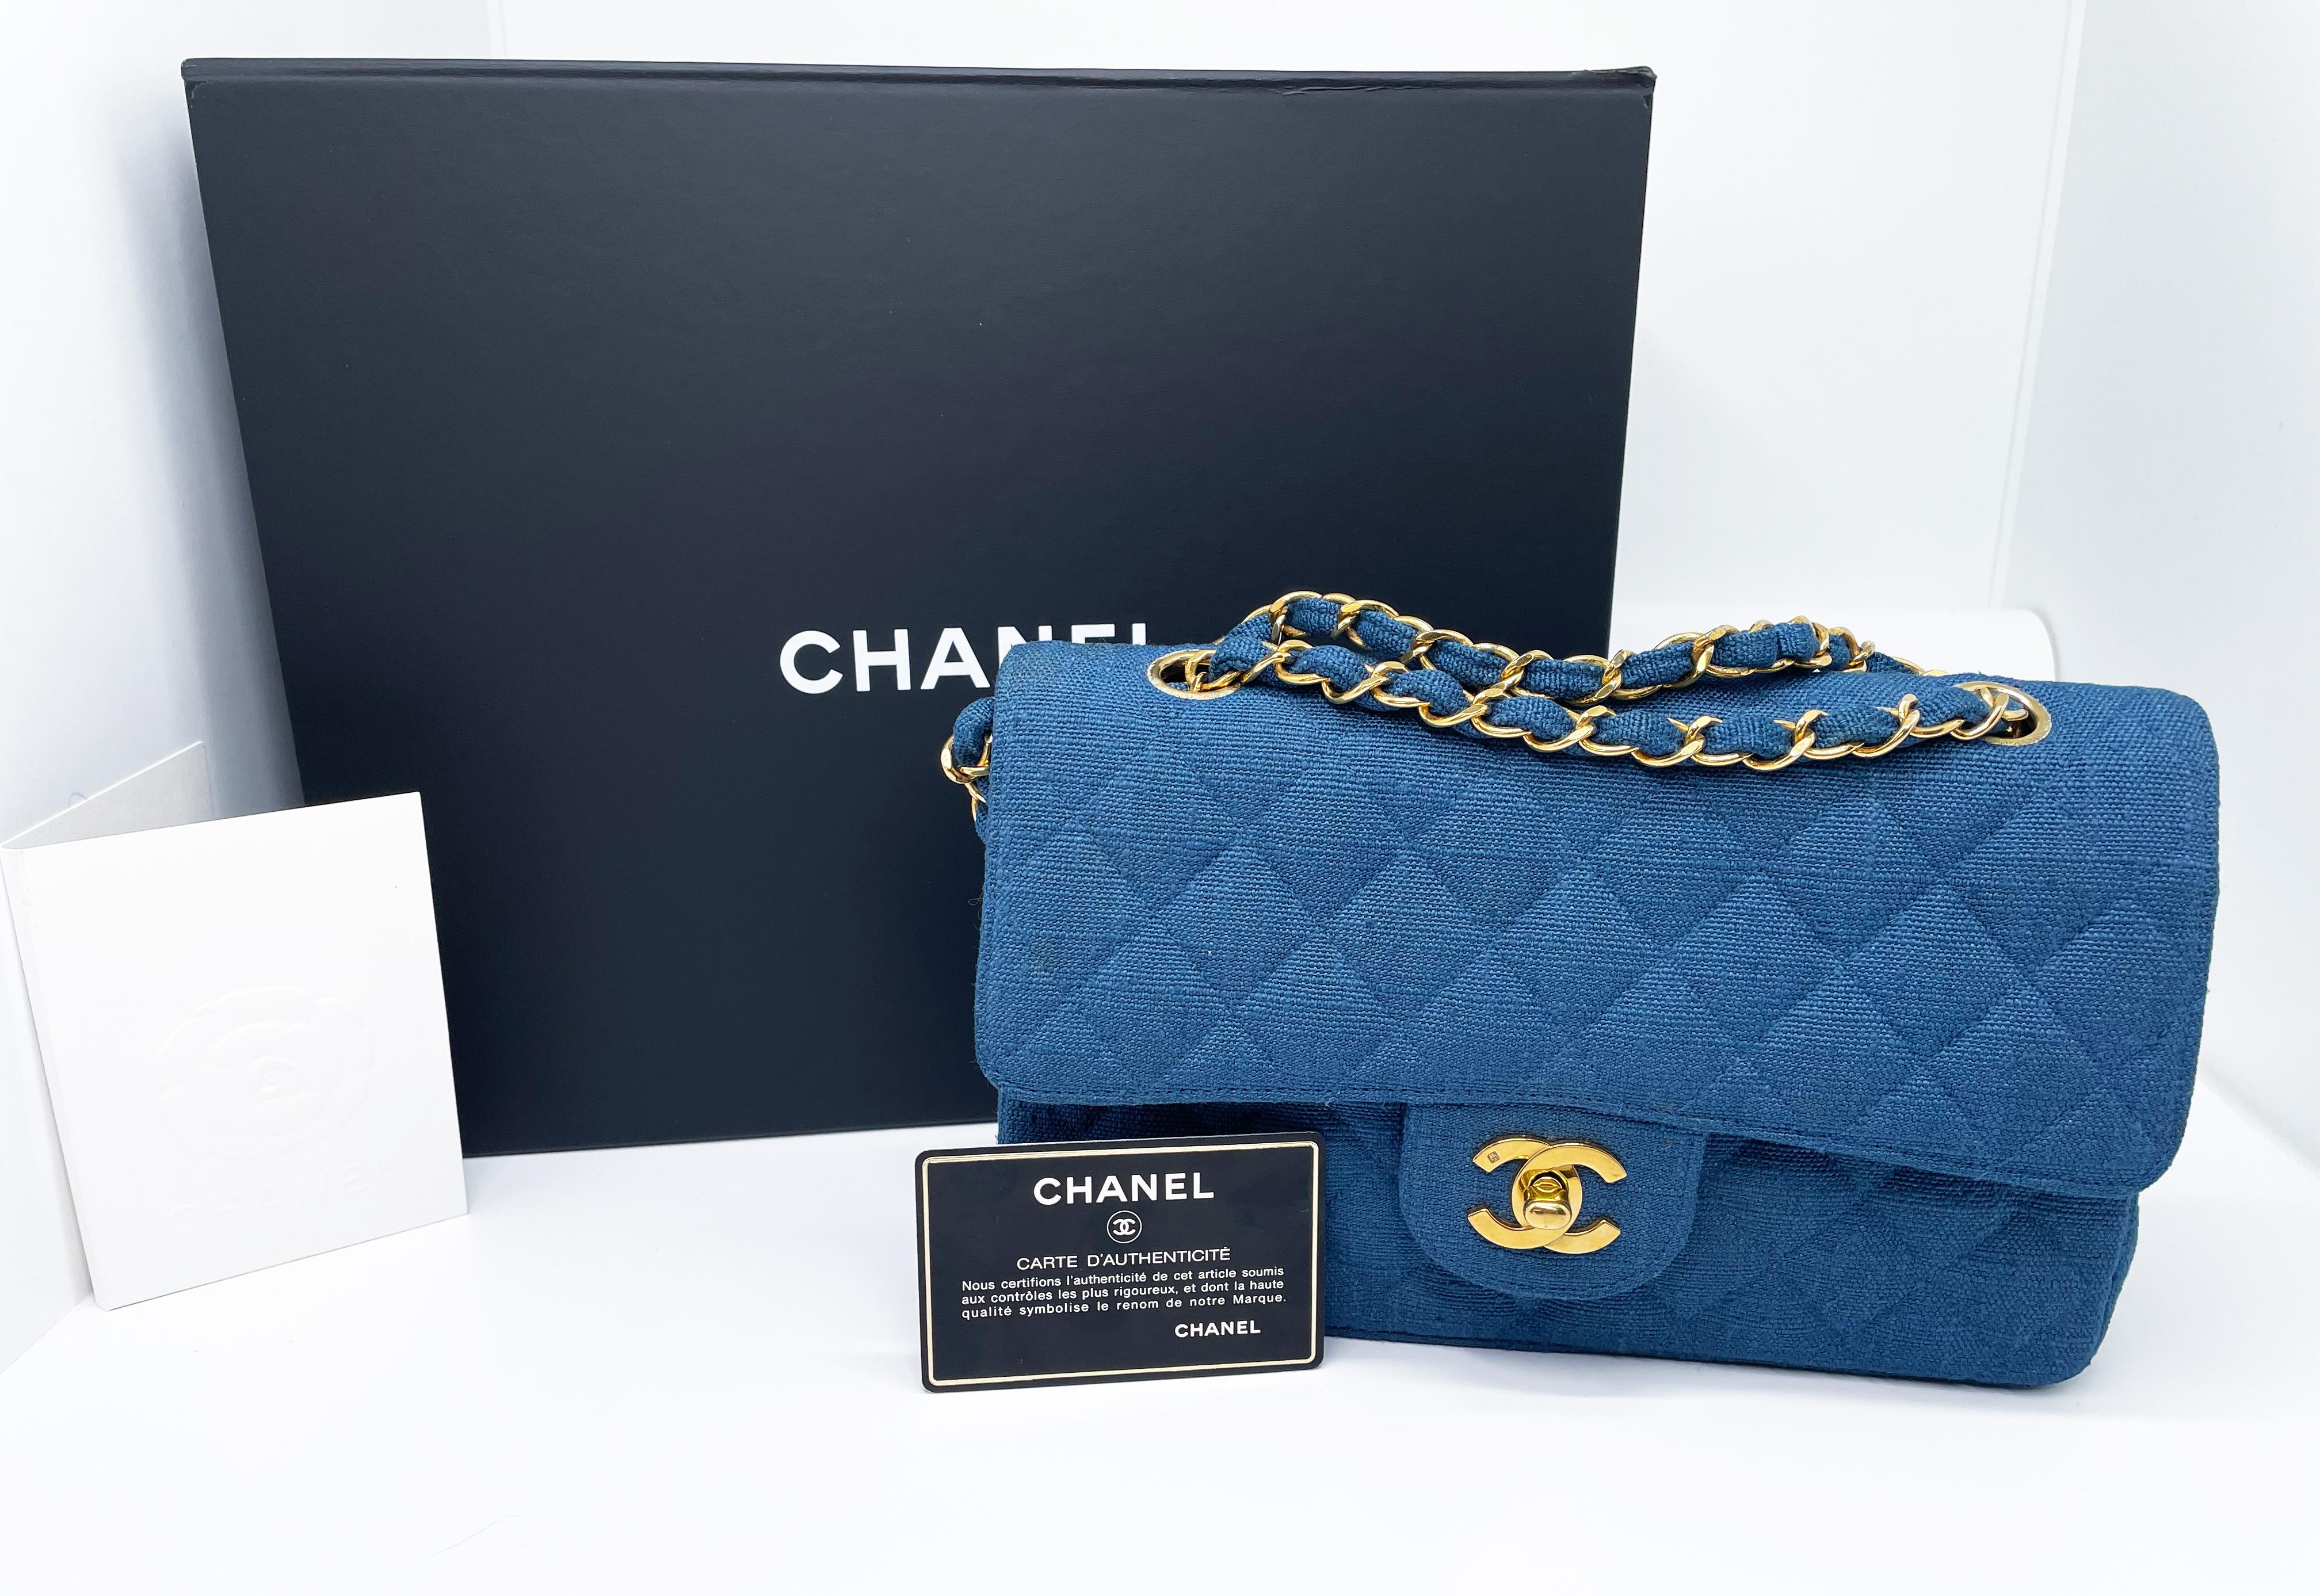 We fell in love with this Chanel Classique 23 cm handbag in Denim and gold-plated gold metal.

This must have with the double Timeless flap in blue Denis, a gold metal chain strap interwoven with blue Denis allowing it to be worn in the hand or on